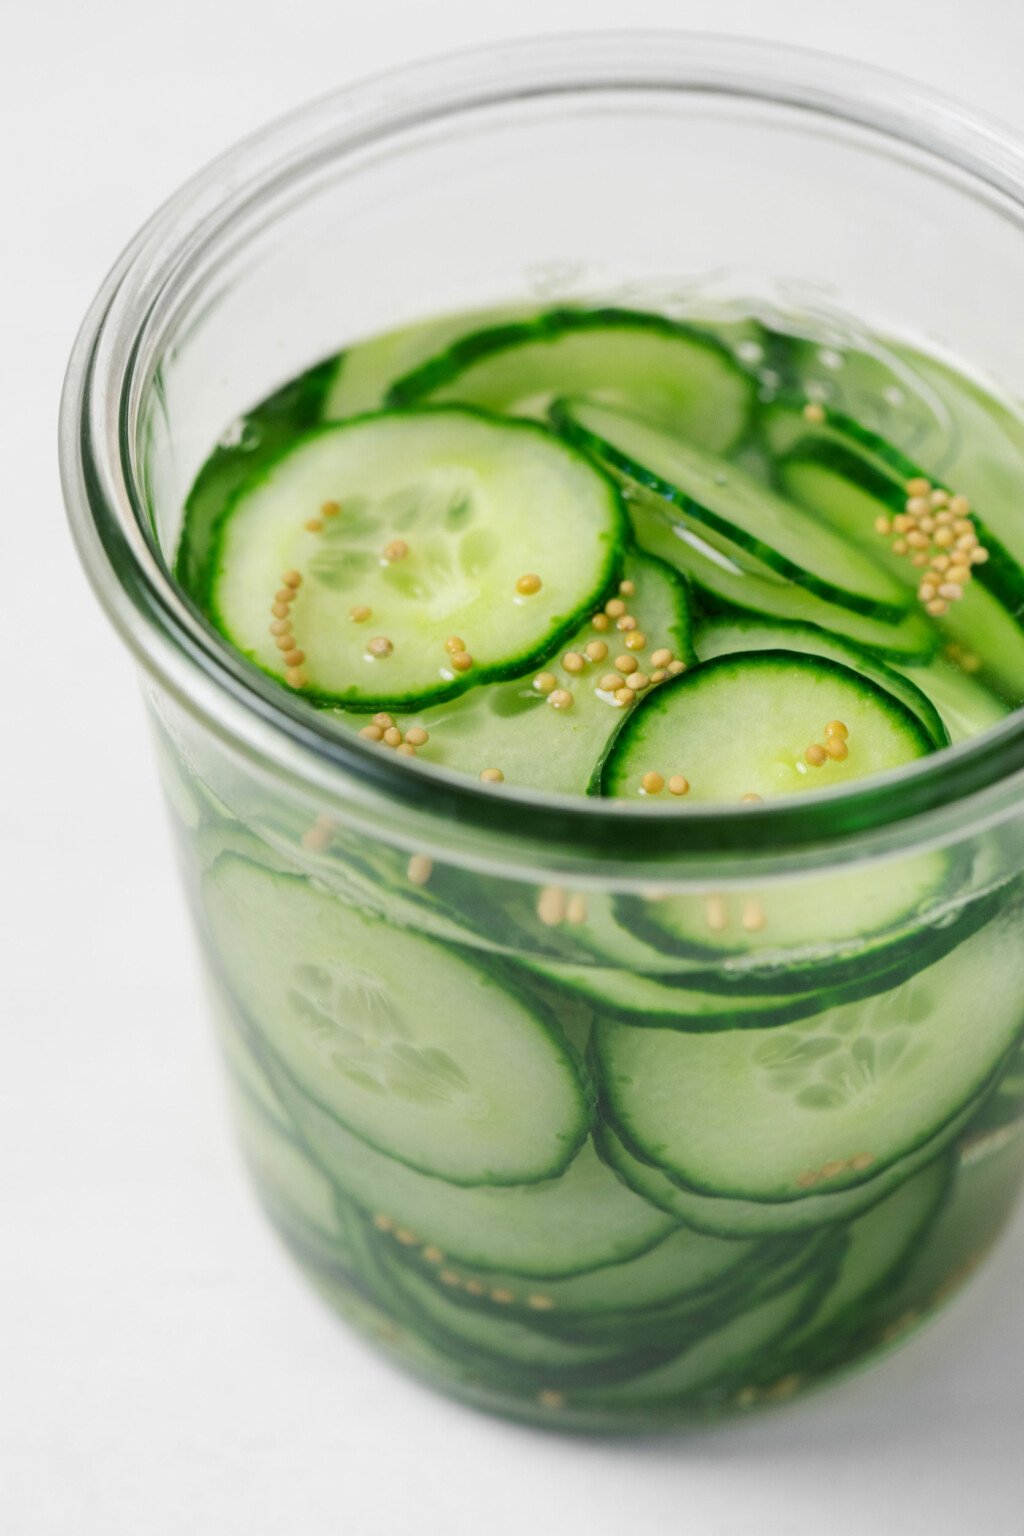 A glass jar is filled with very thinly sliced pickles, liquid, and brown mustard seeds.